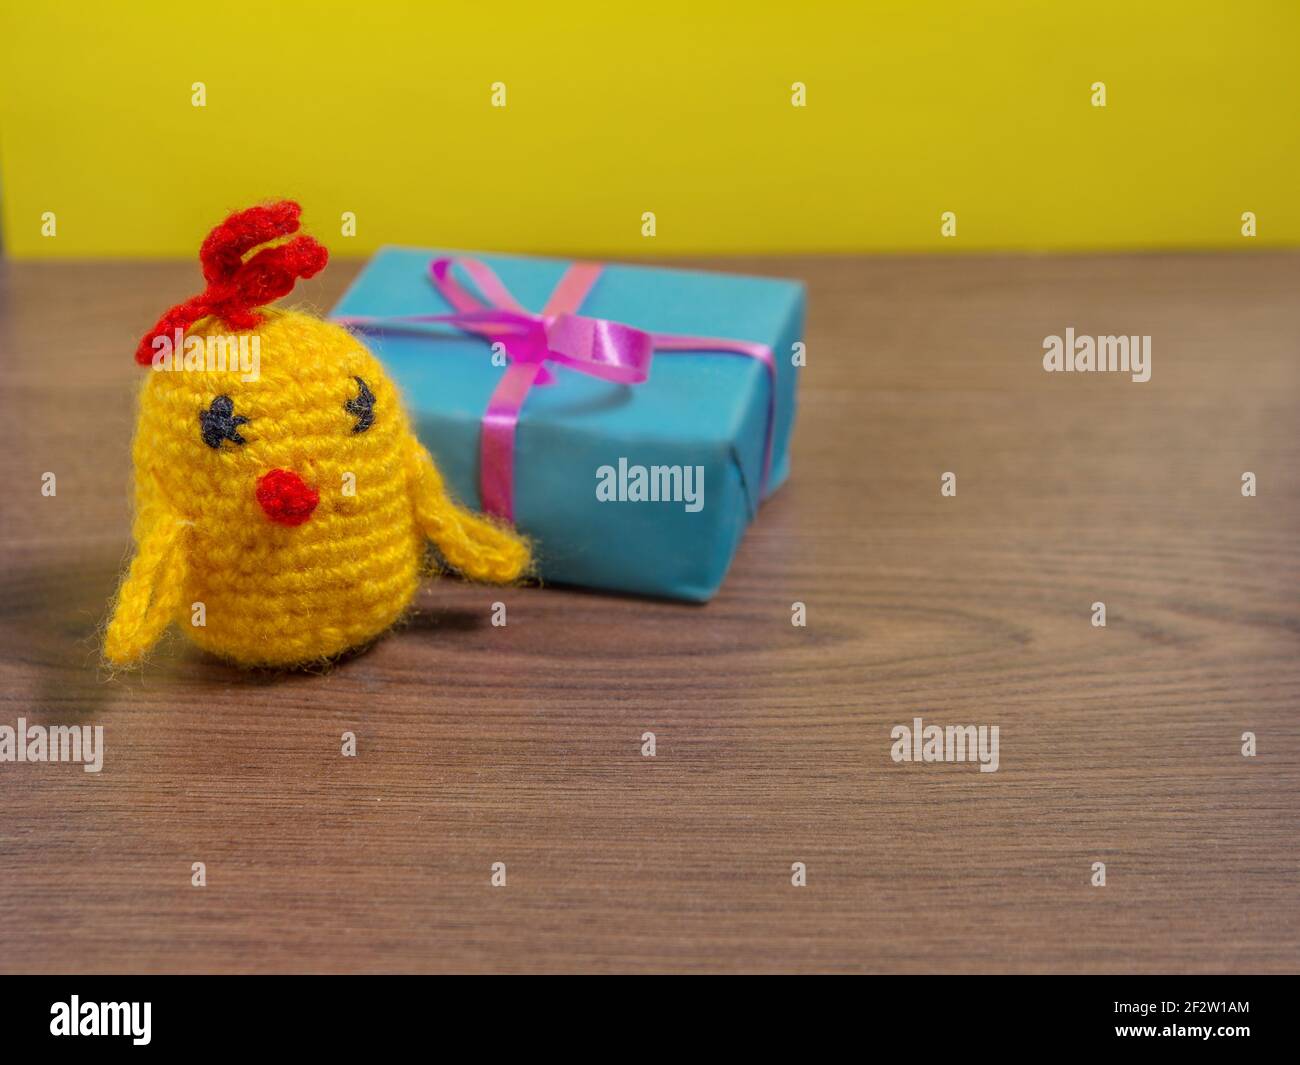 Toy yellow chicken next to gift in blue wrapper on brown table. Stock Photo